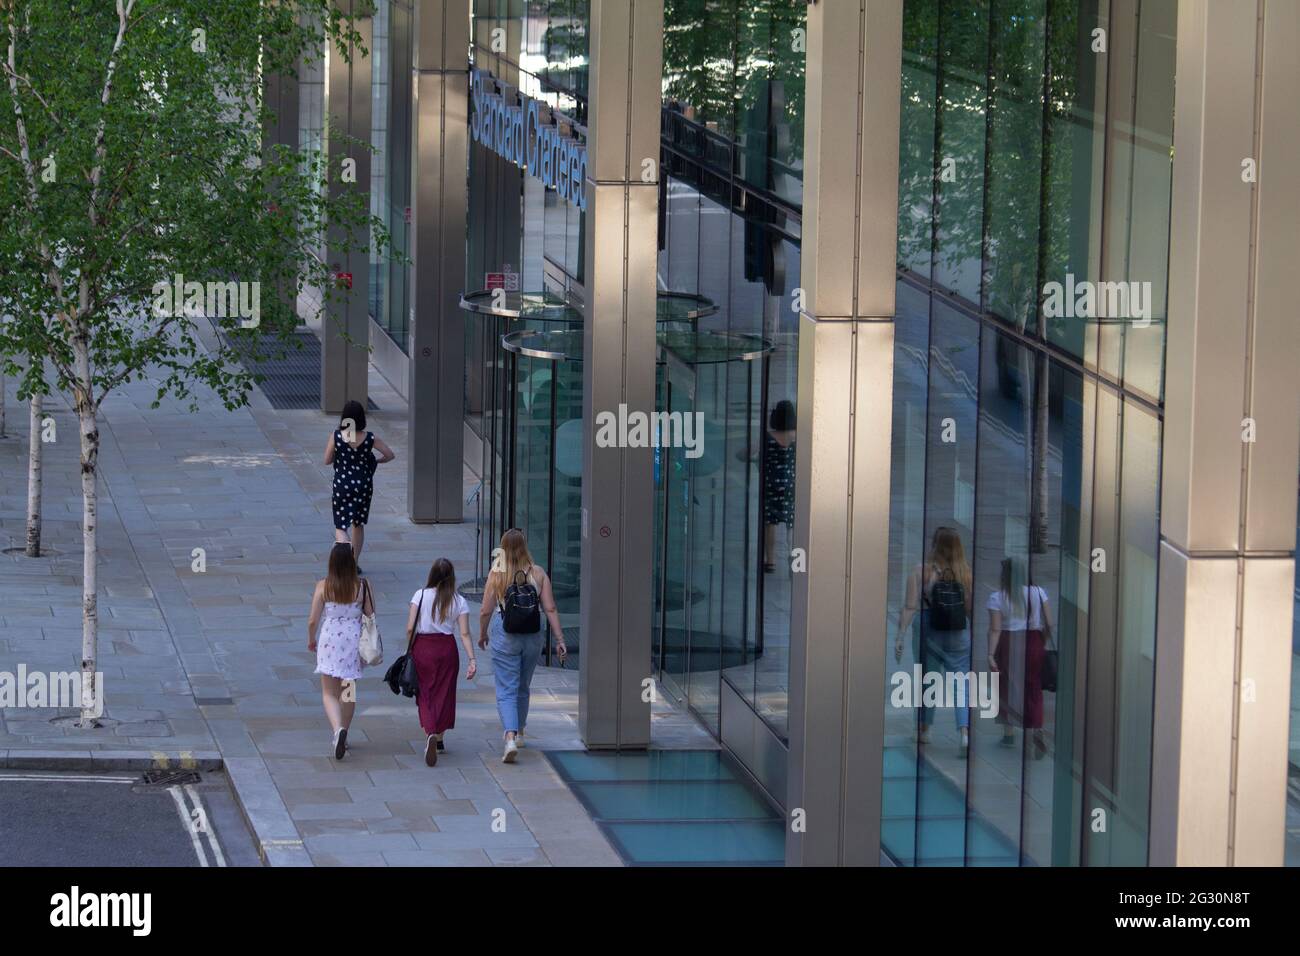 Female city workers walking past Standard Chartered bank in City of London Stock Photo